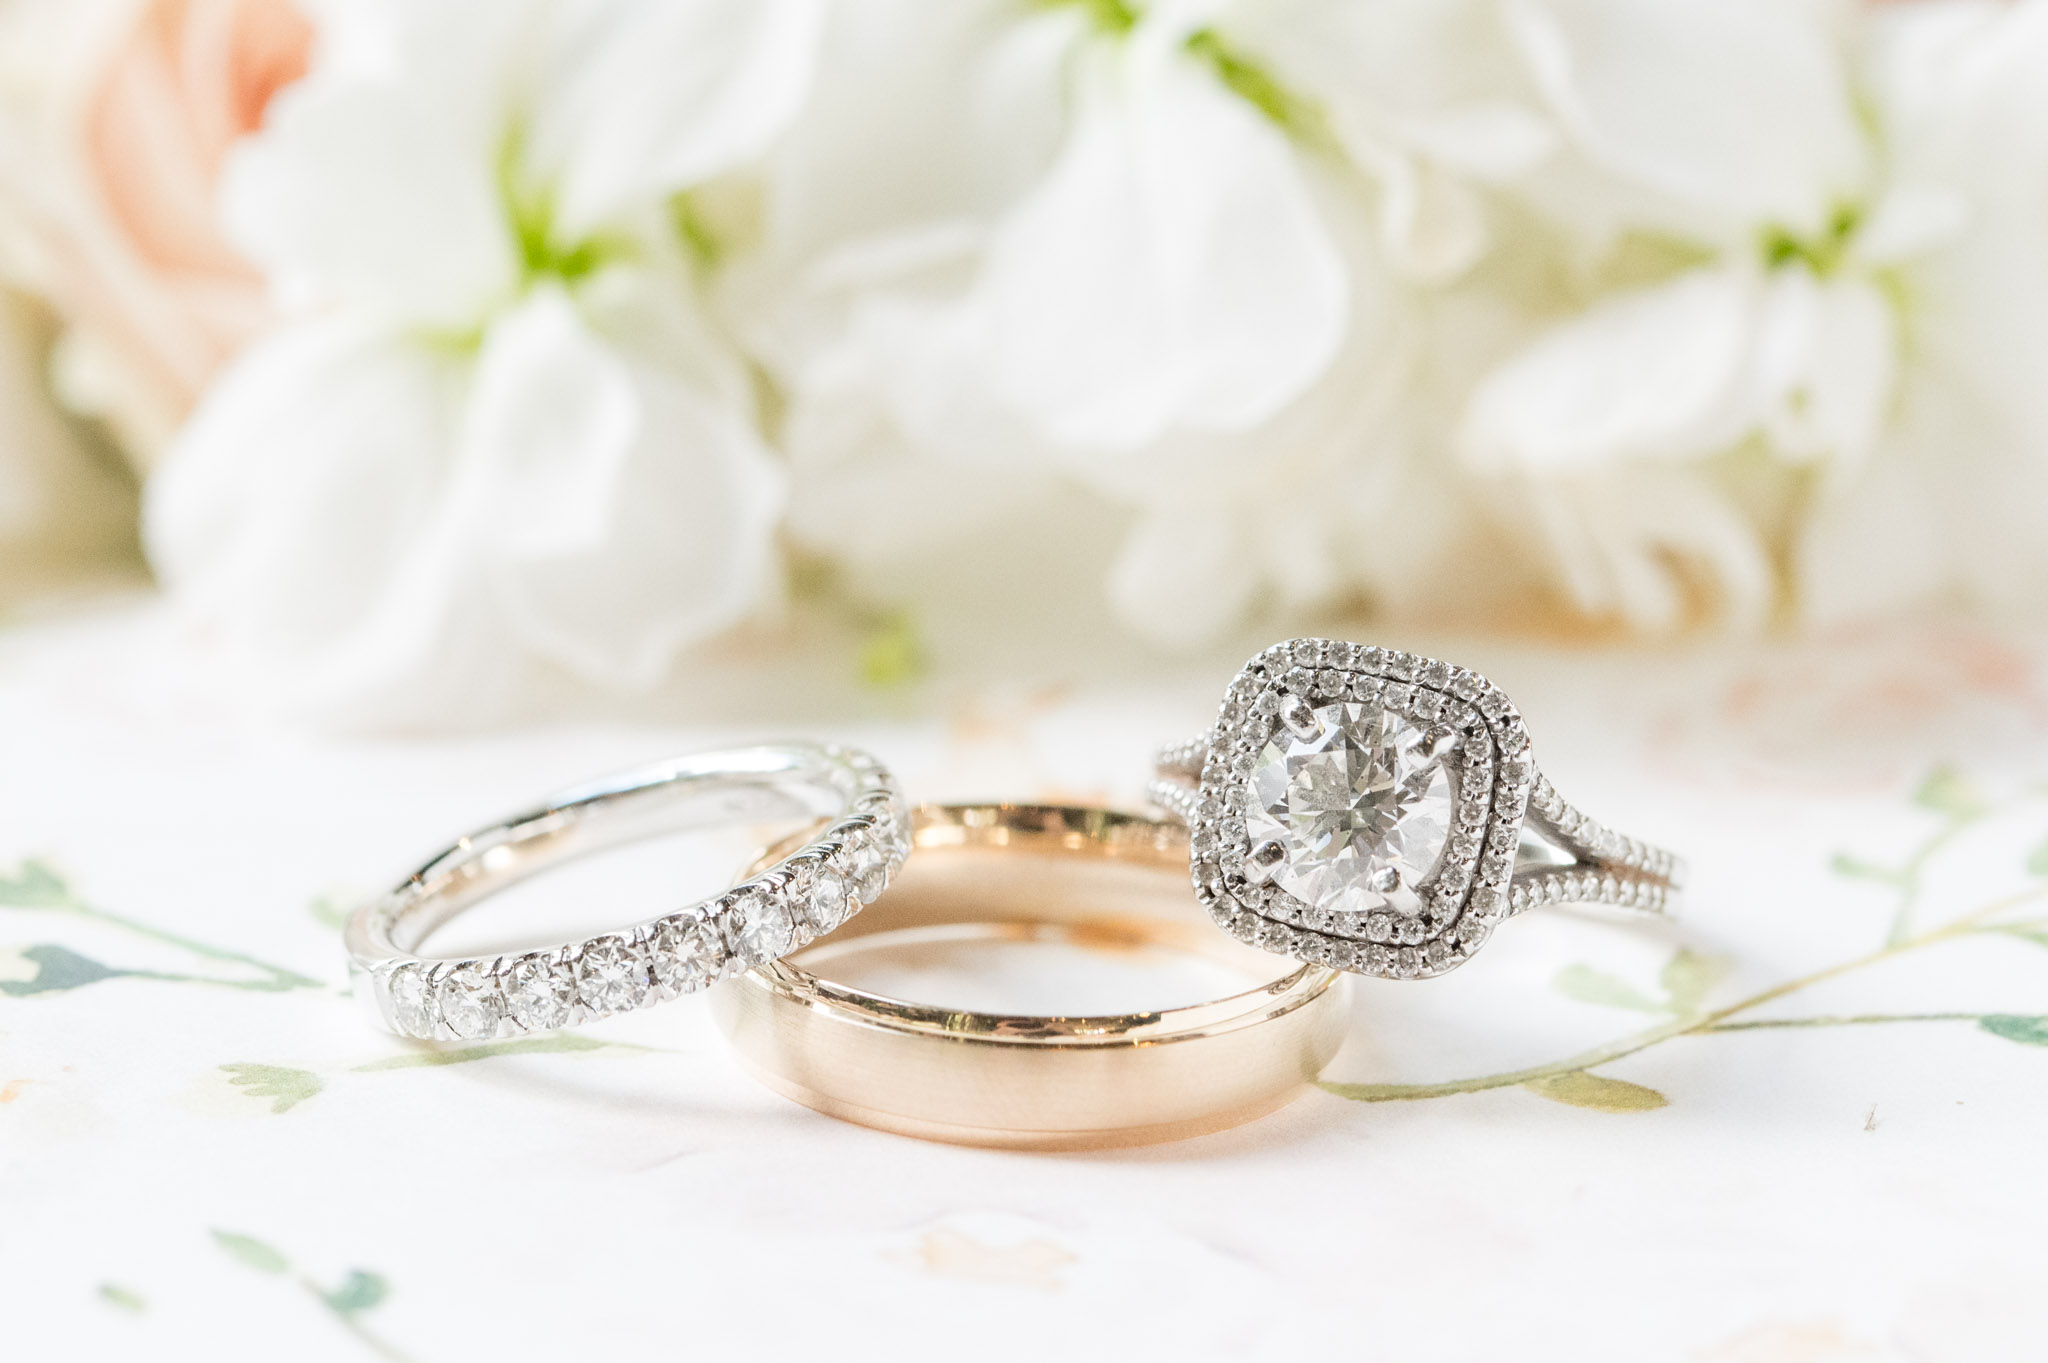 Wedding rings sit in front of flowers.